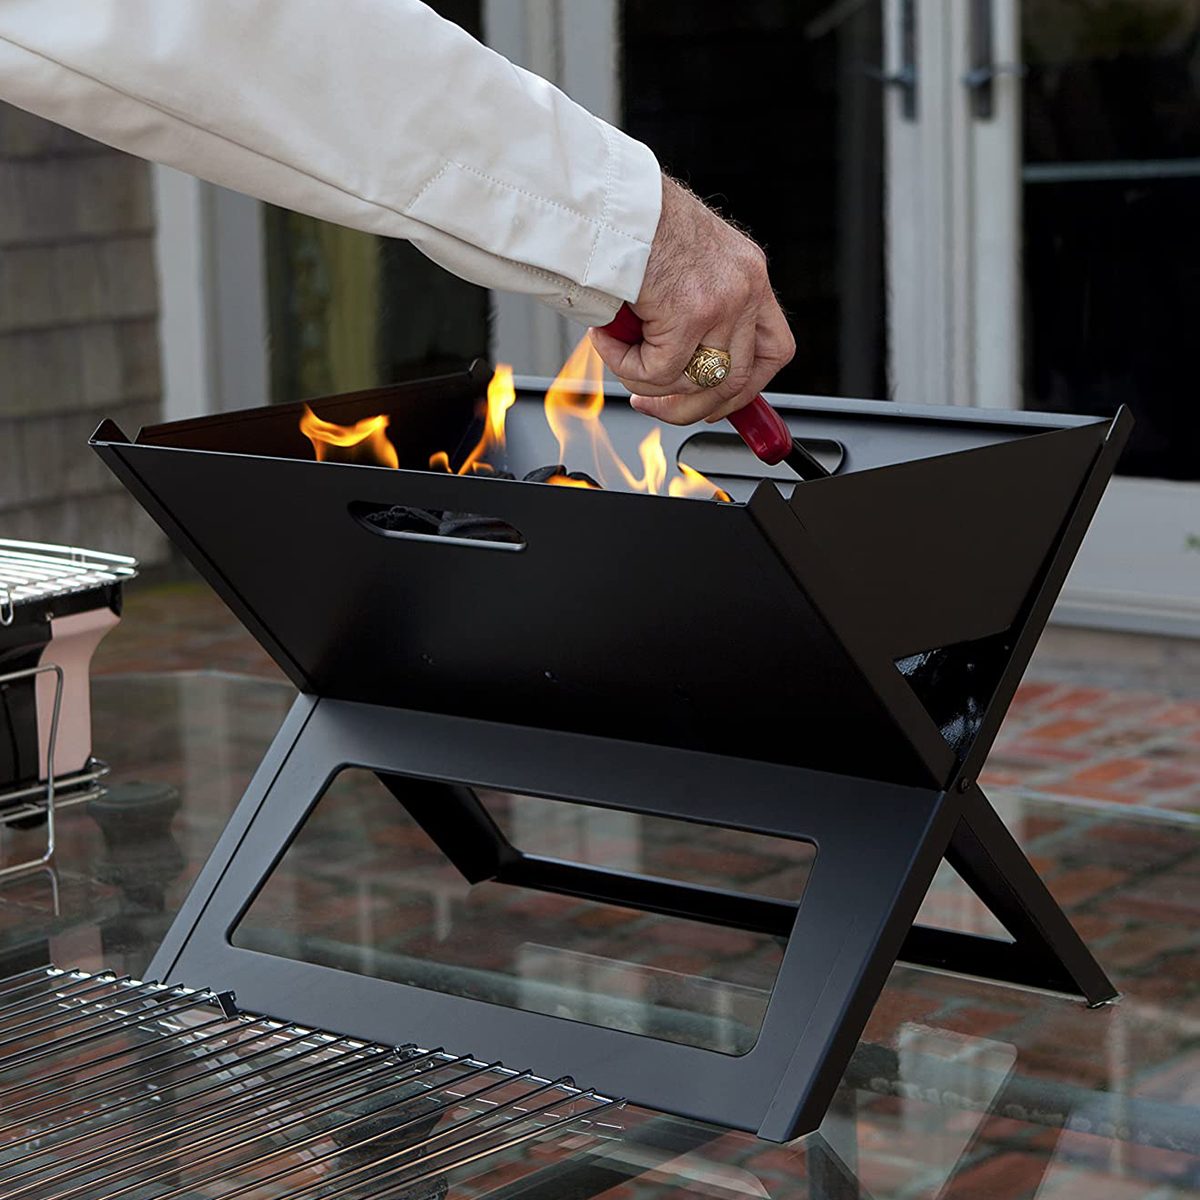 The 13 Best Grilling Accessories of 2023 - Bob Vila